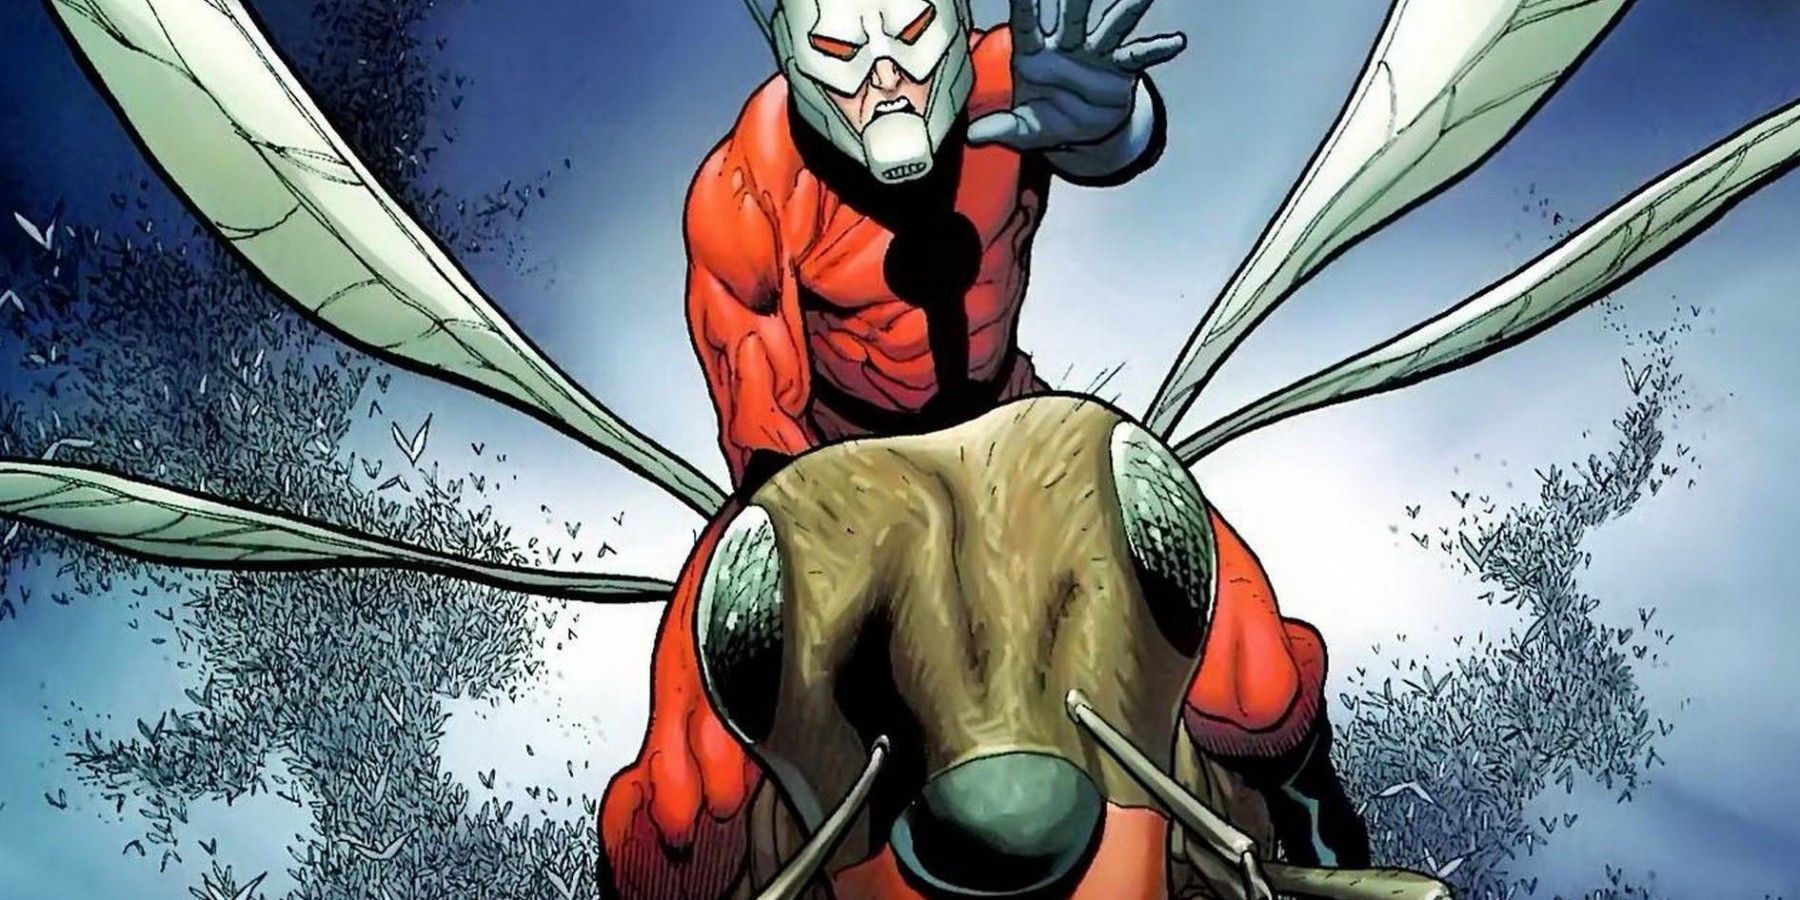 Hank Pym flies on the back of an ant as a swarm follows behind